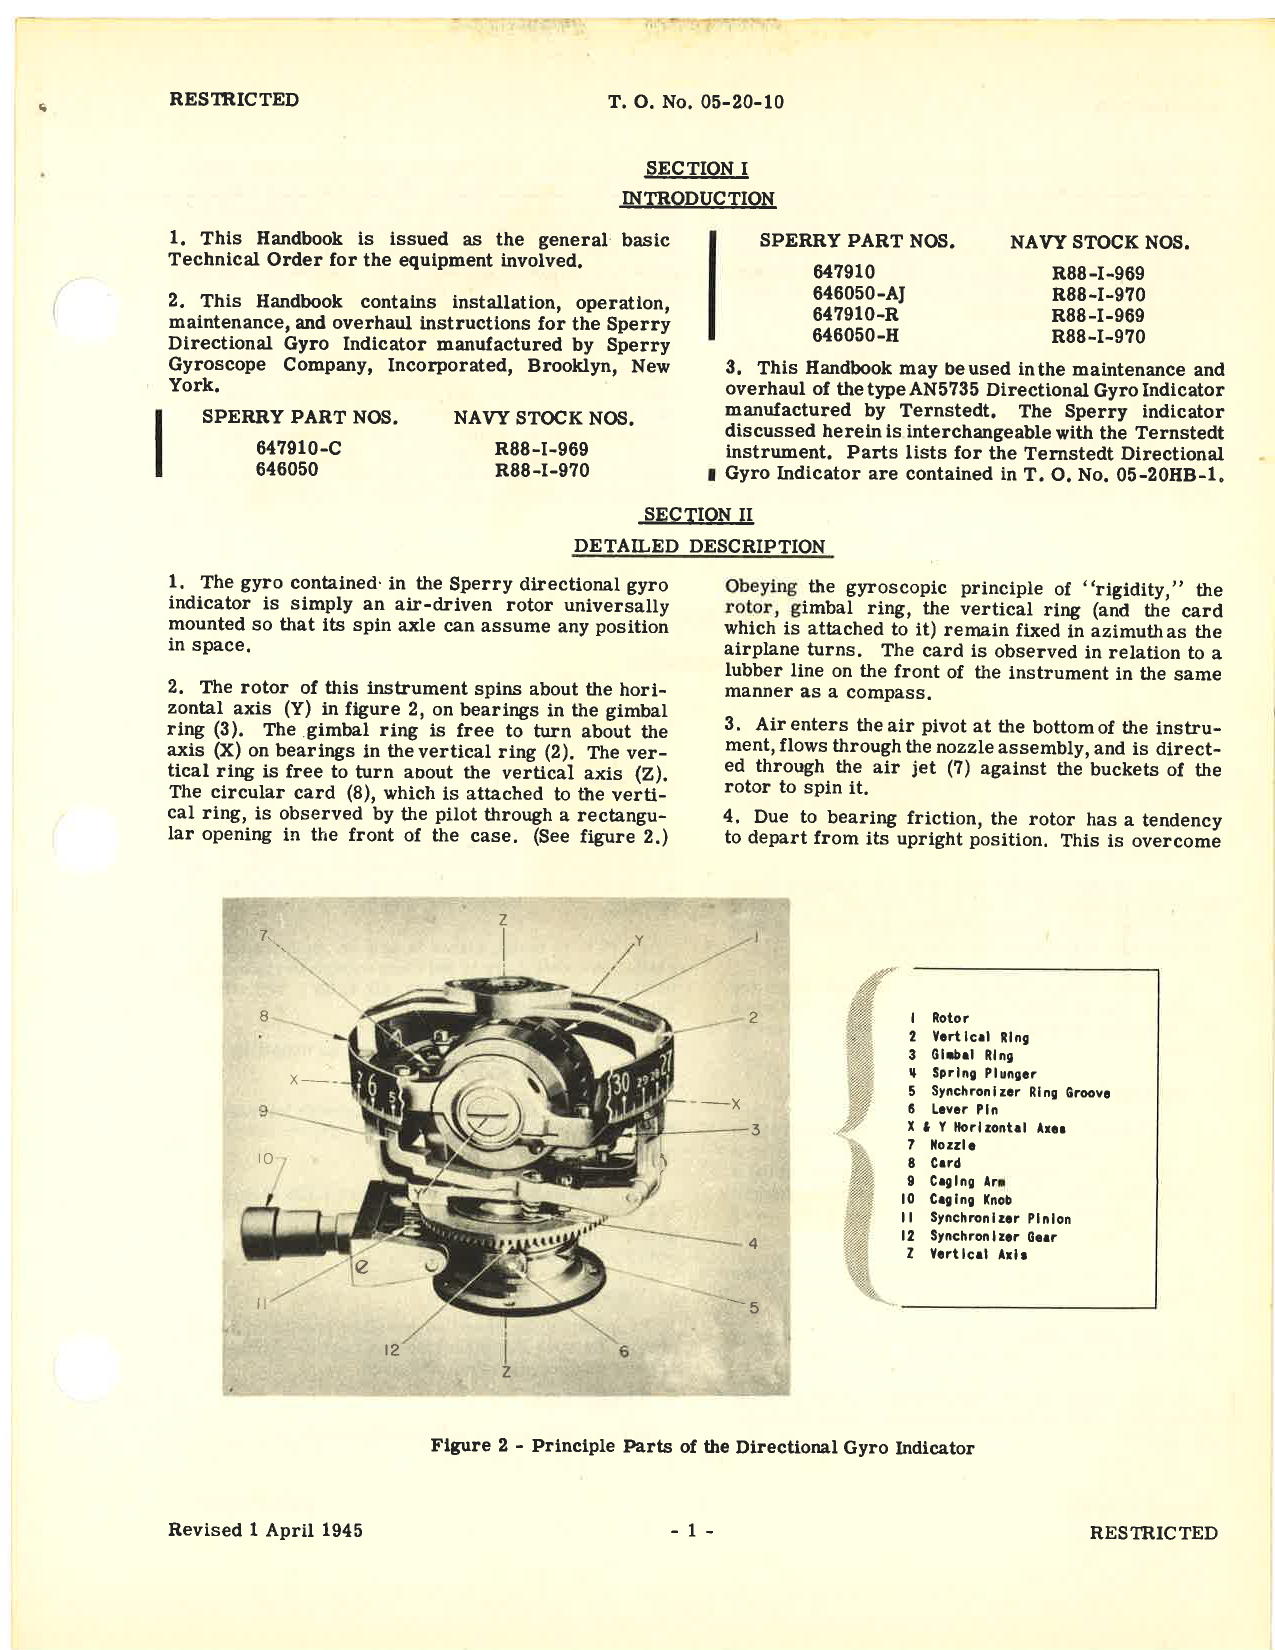 Sample page 7 from AirCorps Library document: Handbook of Instructions with Parts Catalog for Directional Gyro Indicators